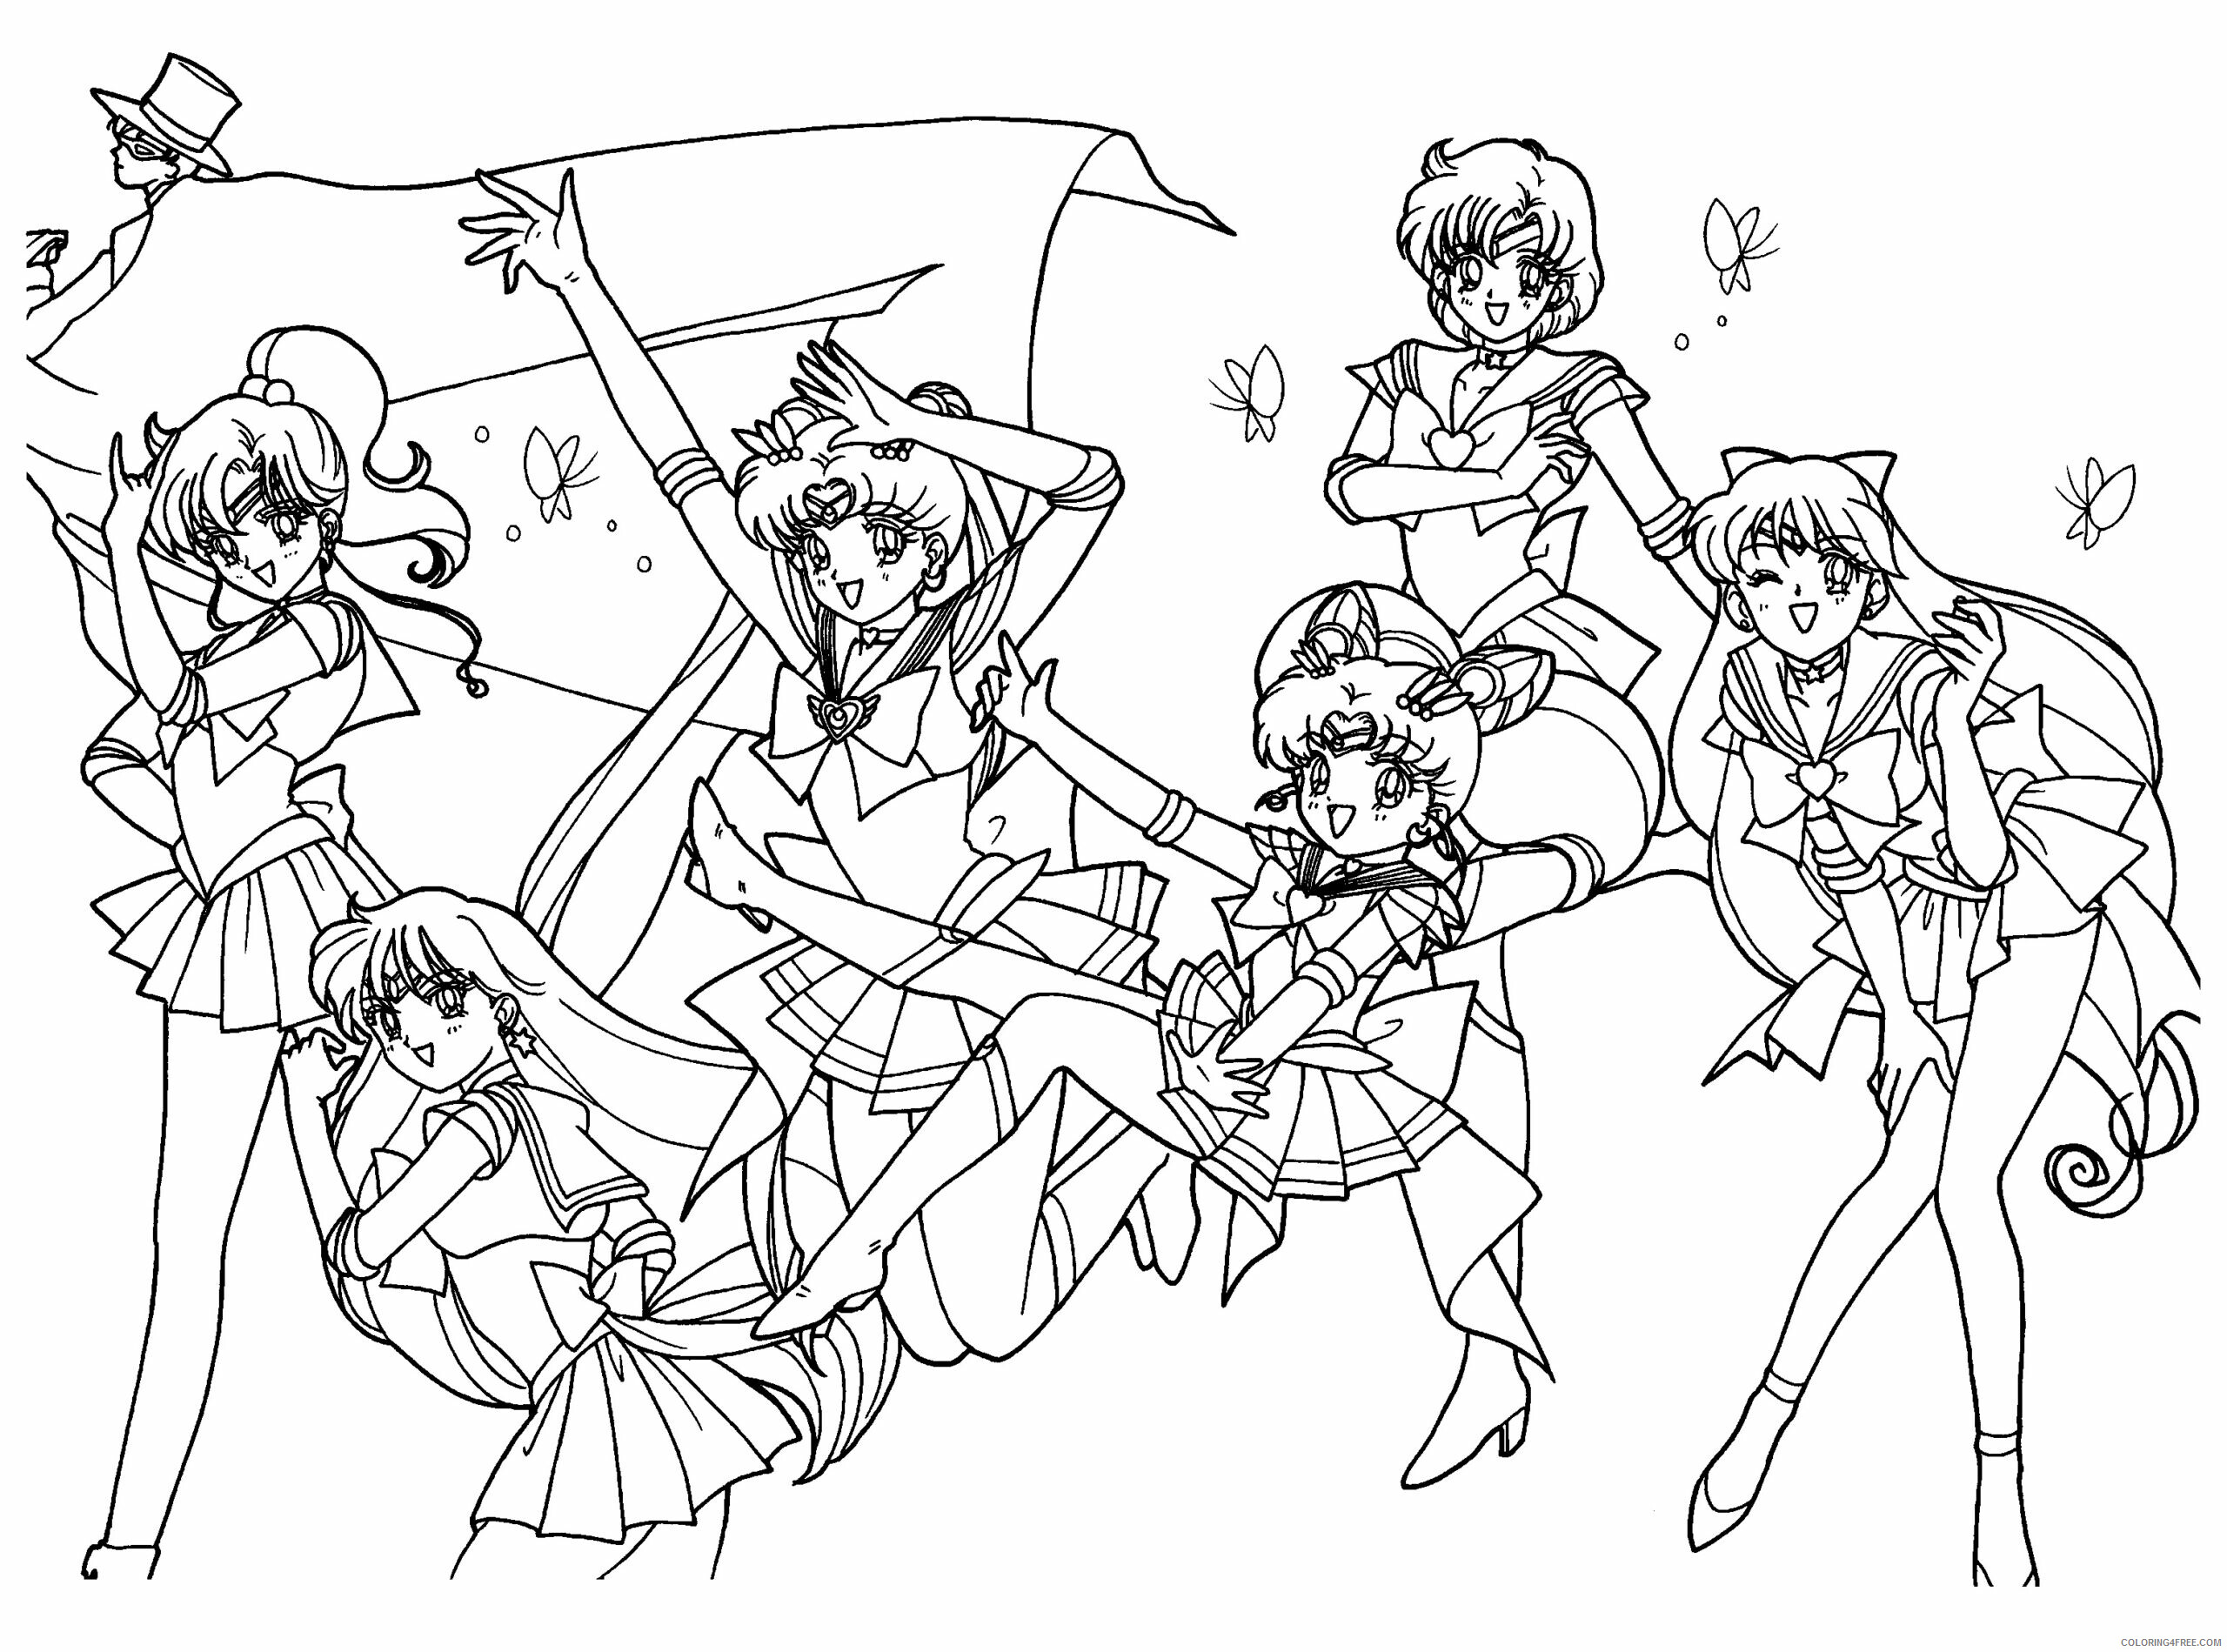 Sailor Moon Printable Coloring Pages Anime sailormoon tQoBp 2021 0995 Coloring4free